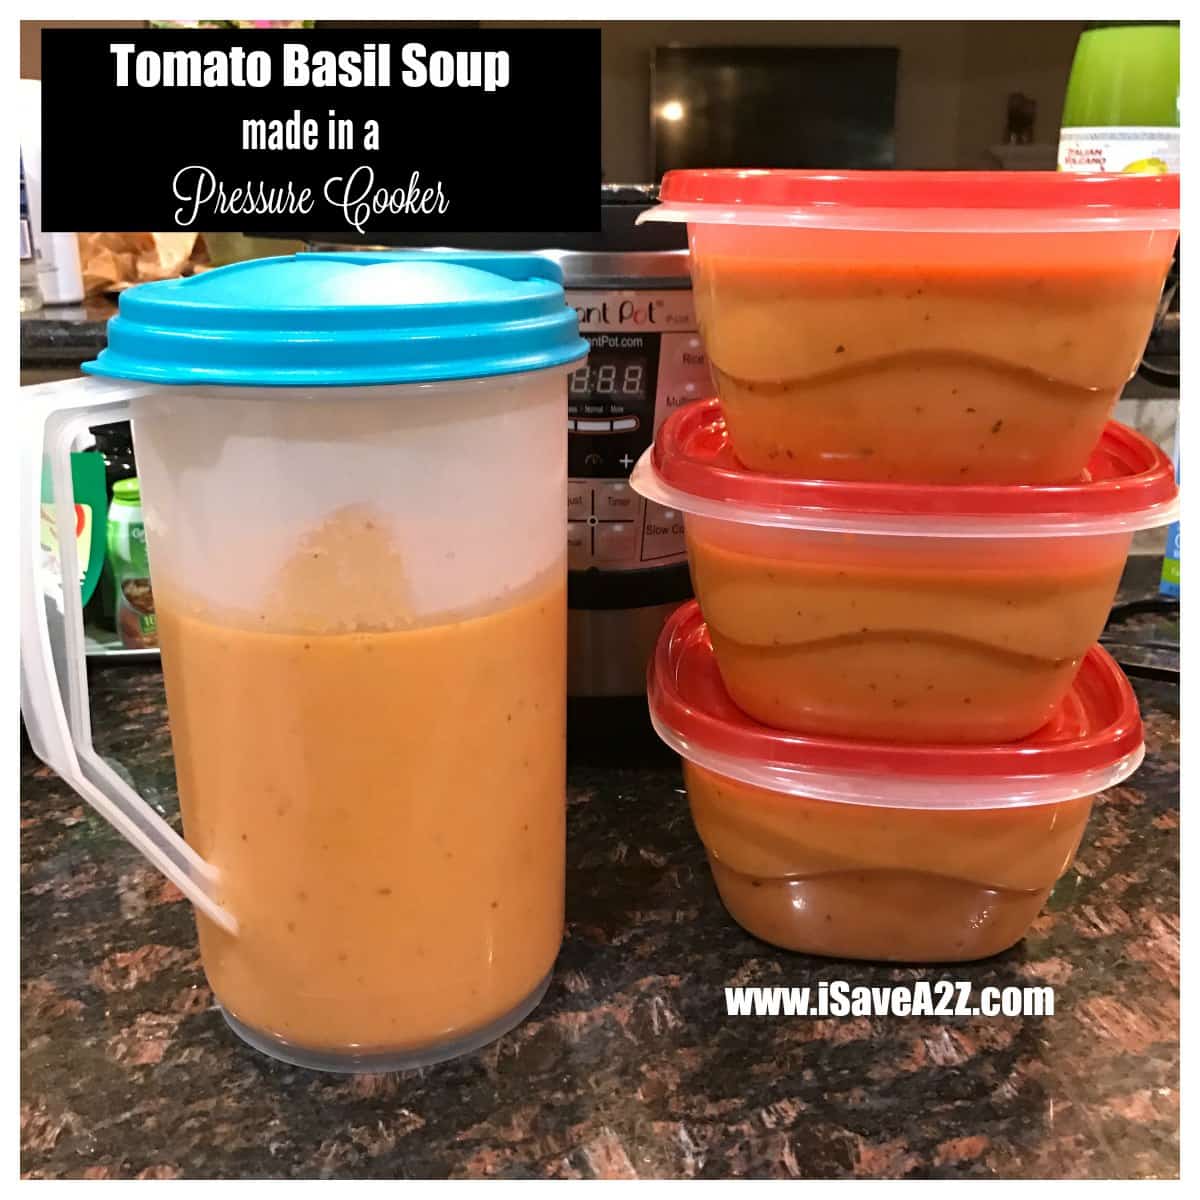 Nordstrom Tomato Basil Soup Made in a Pressure Cooker!